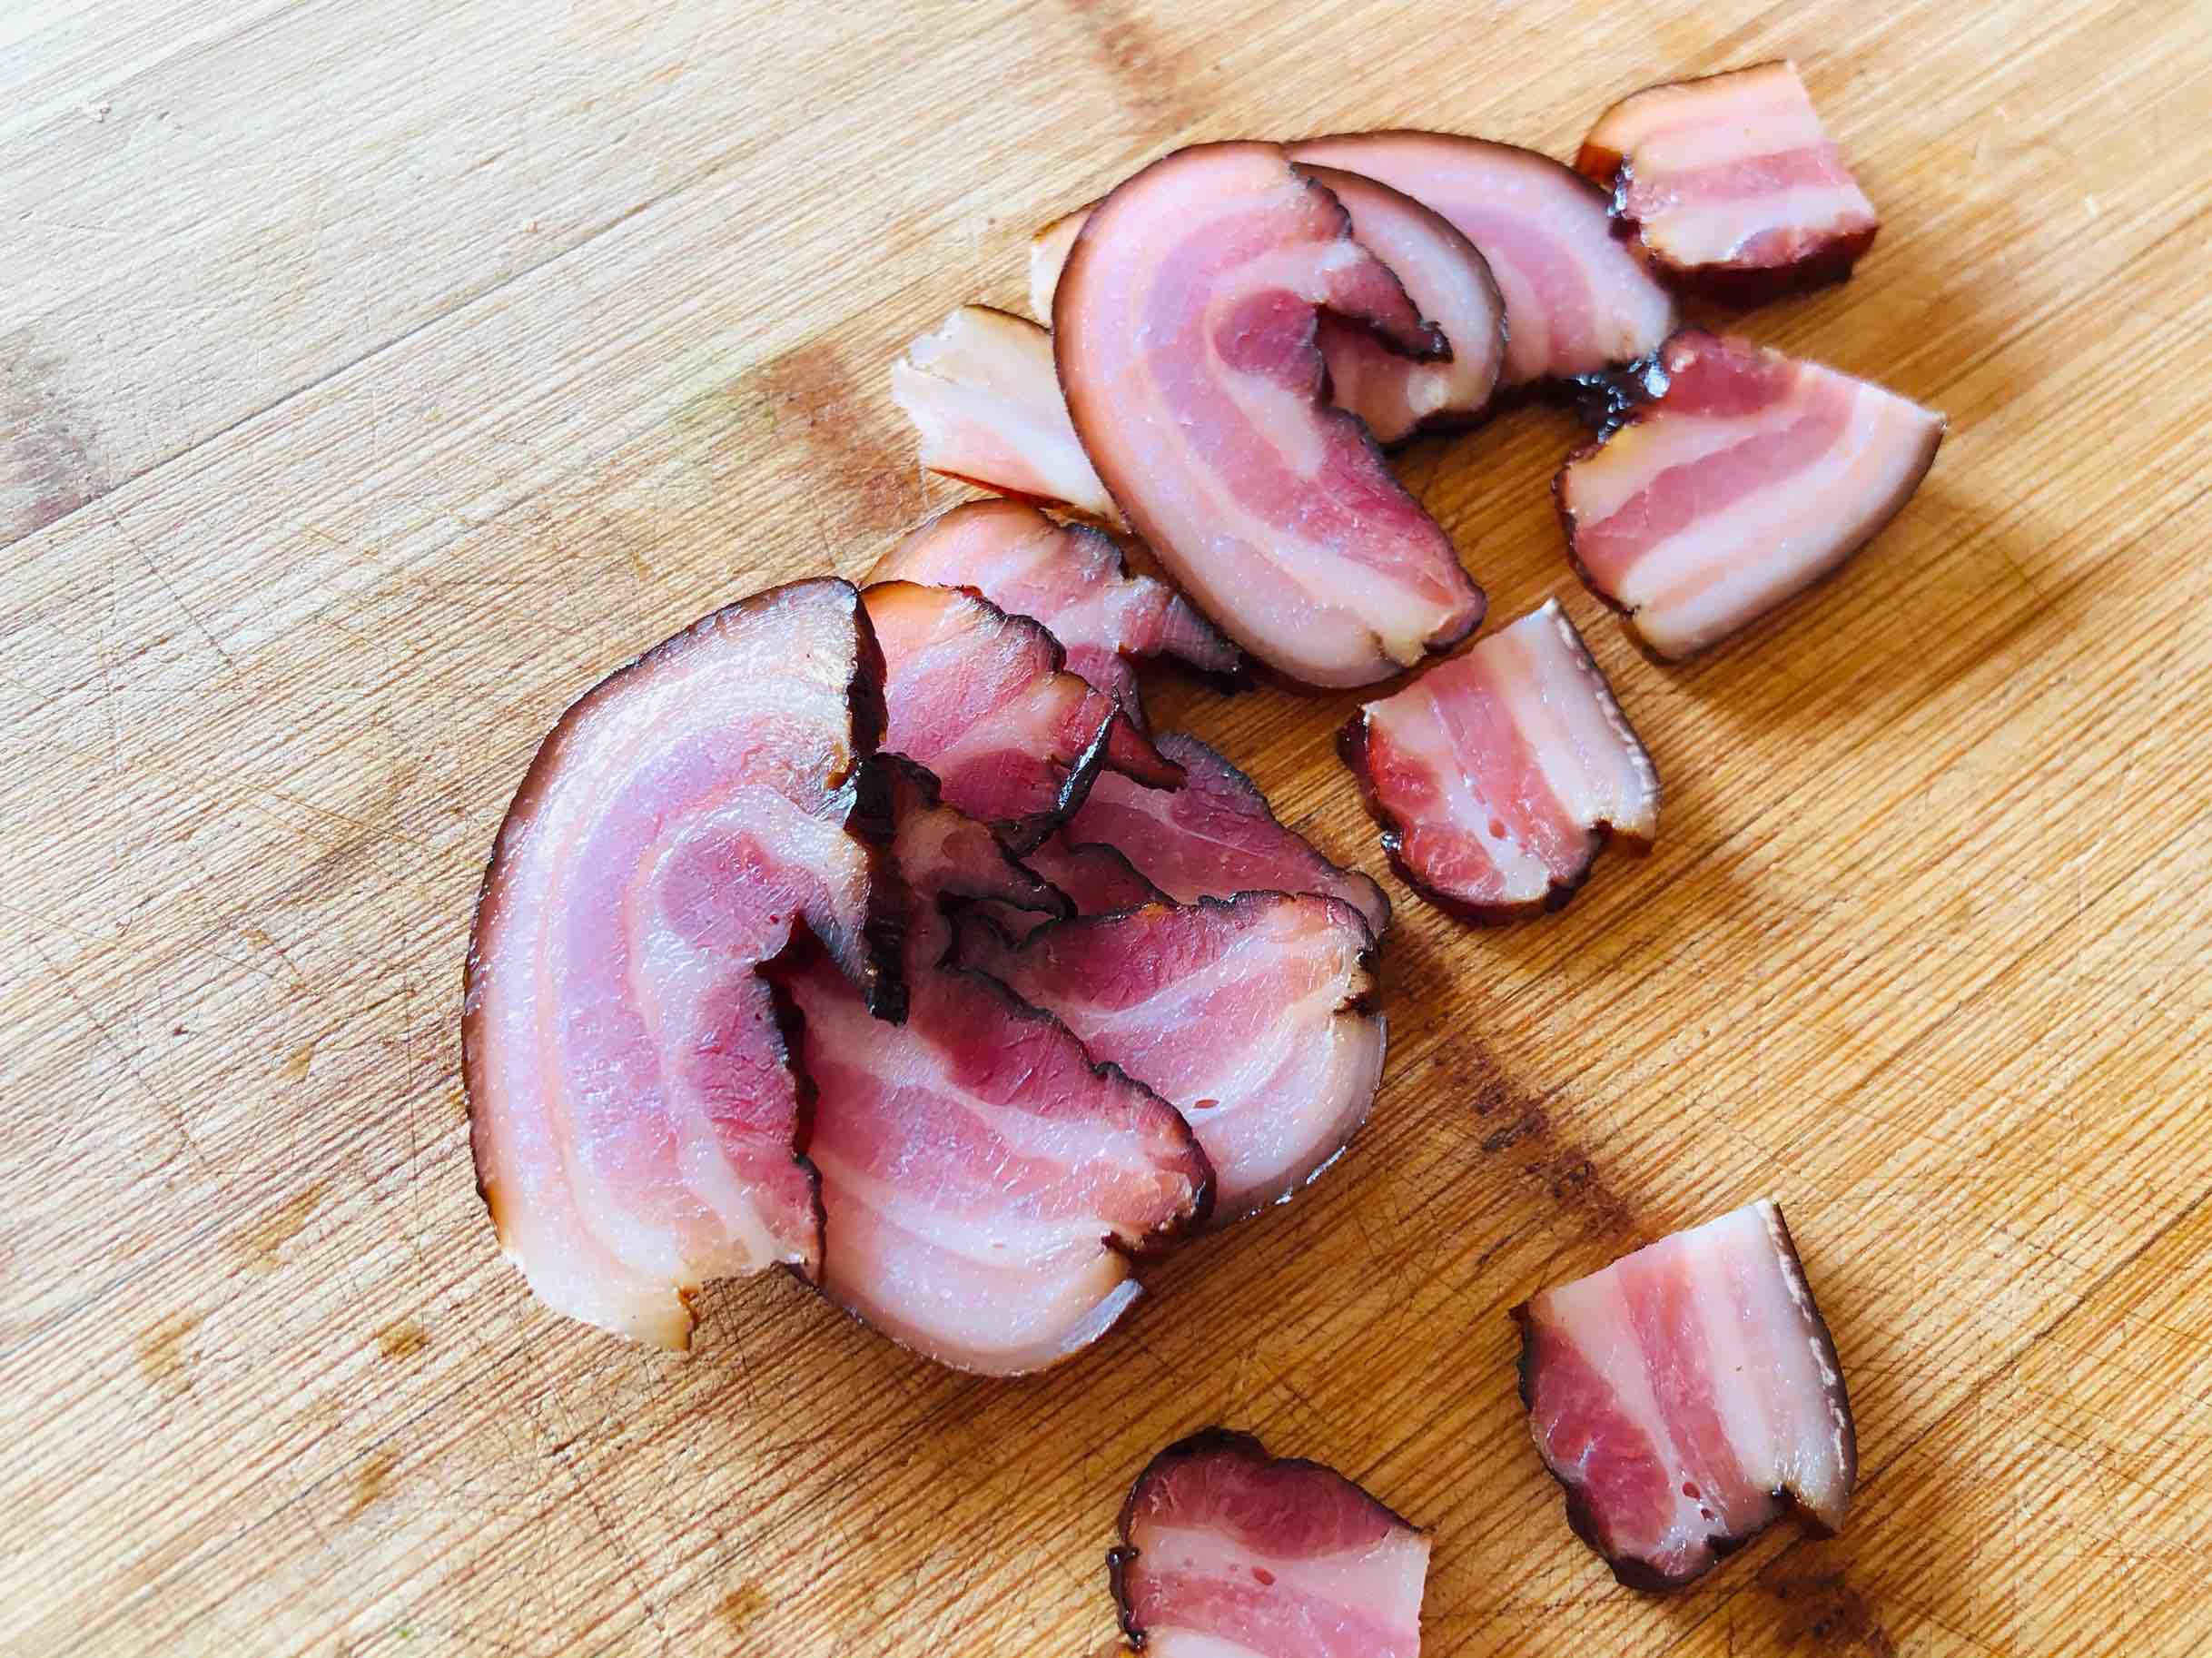 New Year’s Eve Dinner: Stir-fried Bacon with Caper Beans recipe